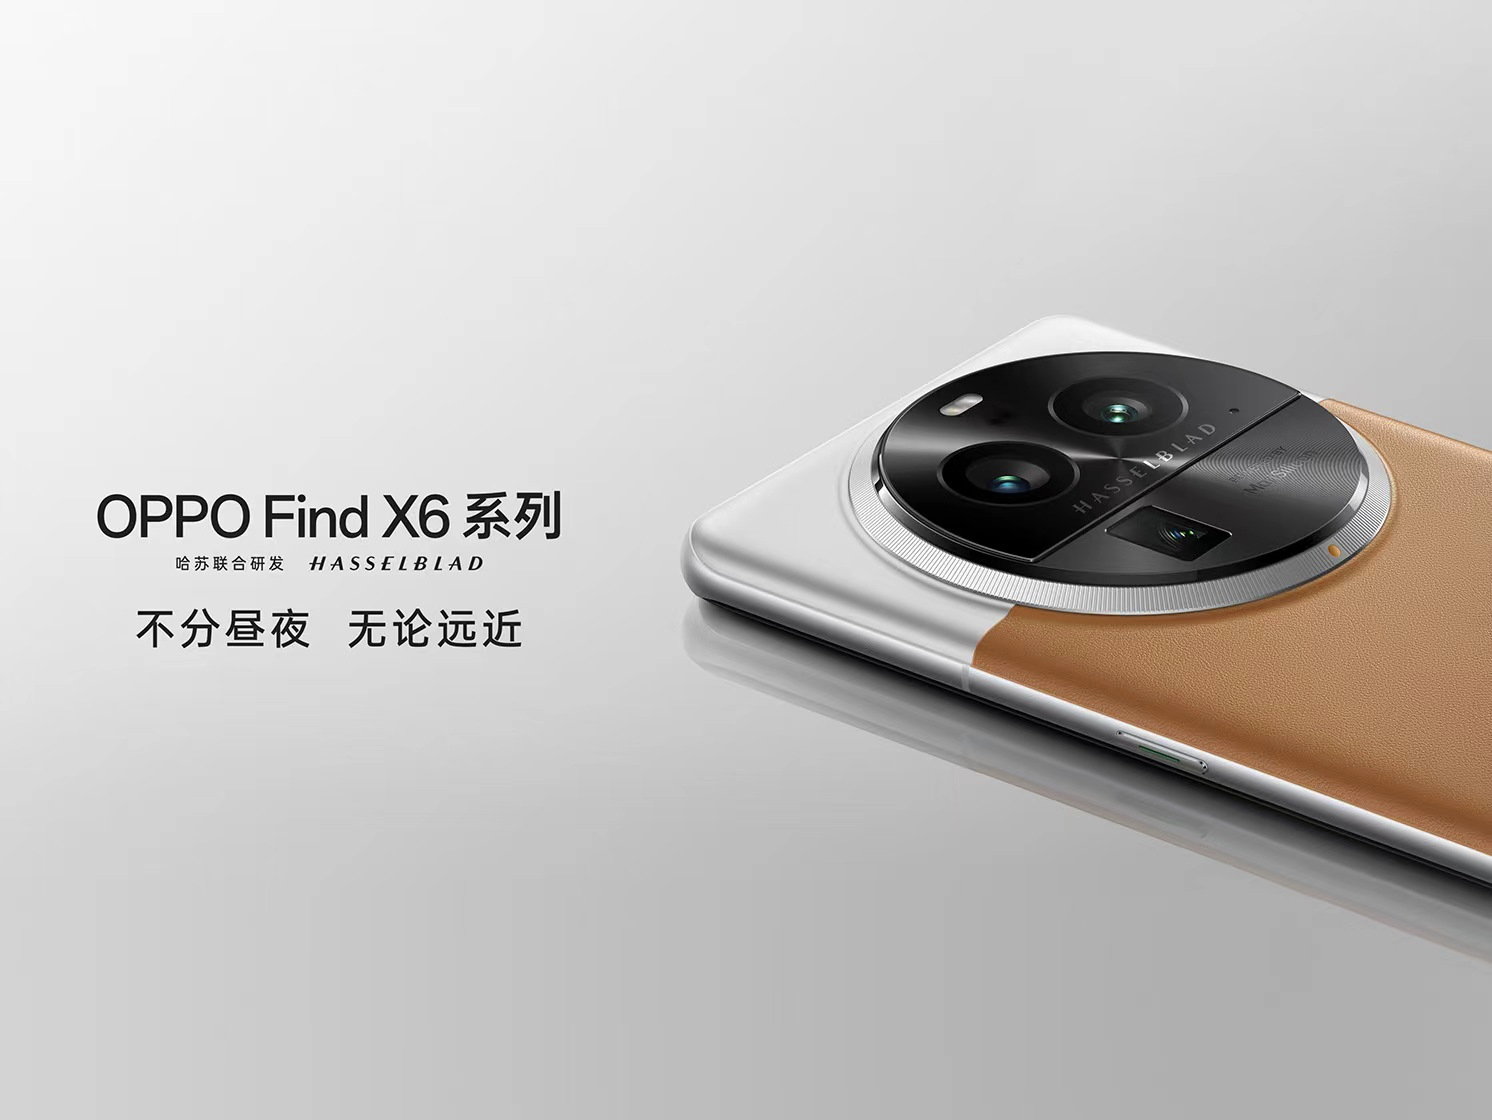 OPPO Find X7 Ultra launched with SD 8 Gen 3 and Quad Cameras